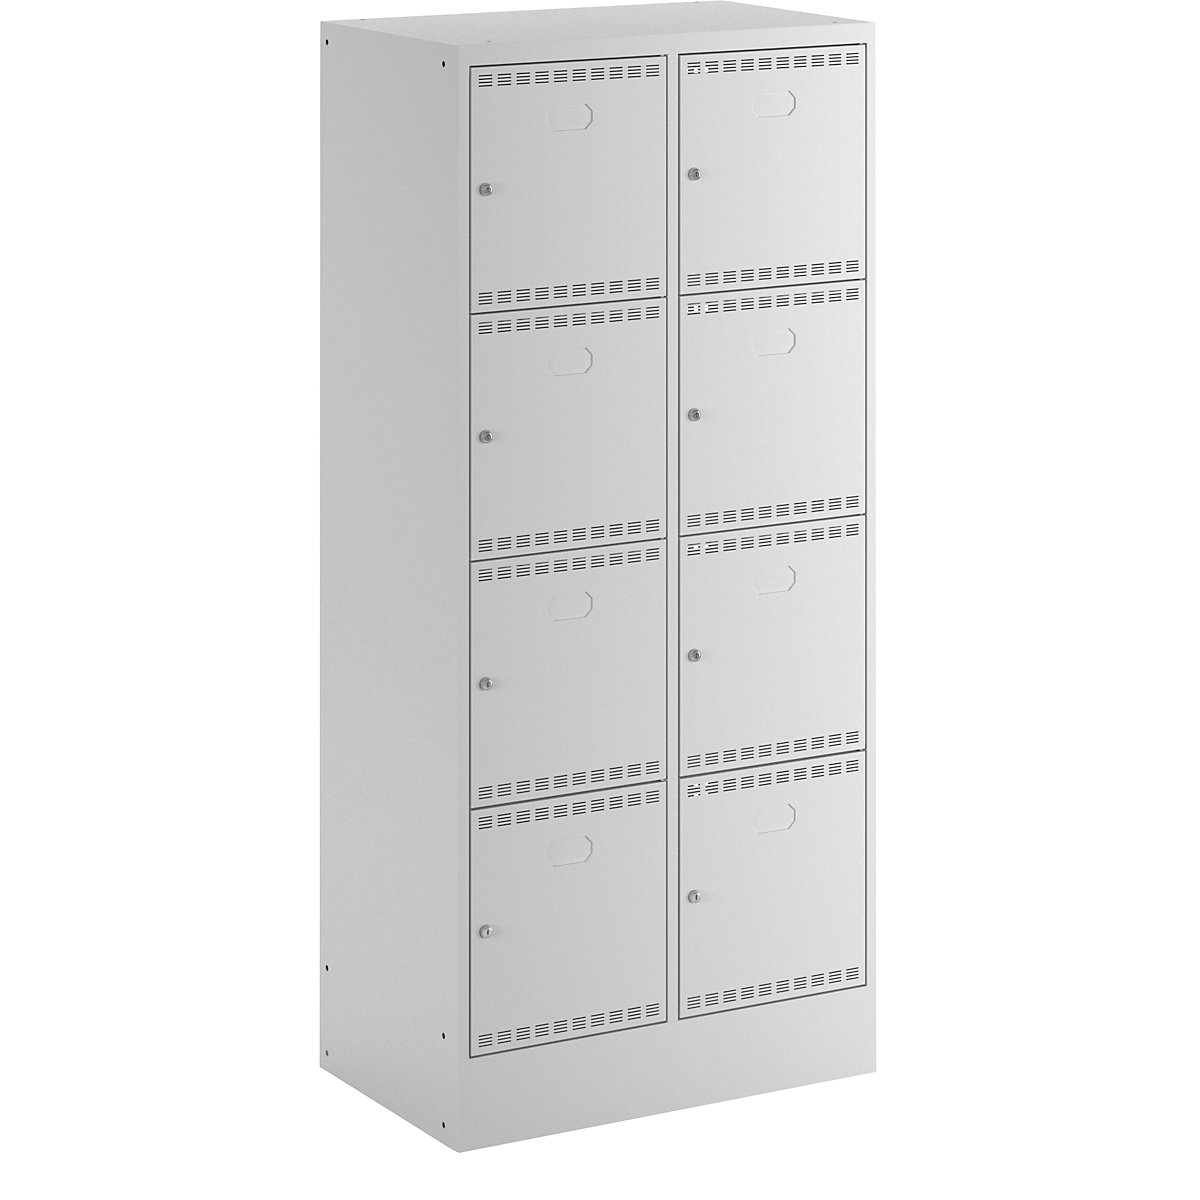 Battery charging cabinet with lockable compartments – LISTA, with 2 x 4 compartments, 1 x 230 V, 1 x RJ45, grey-15